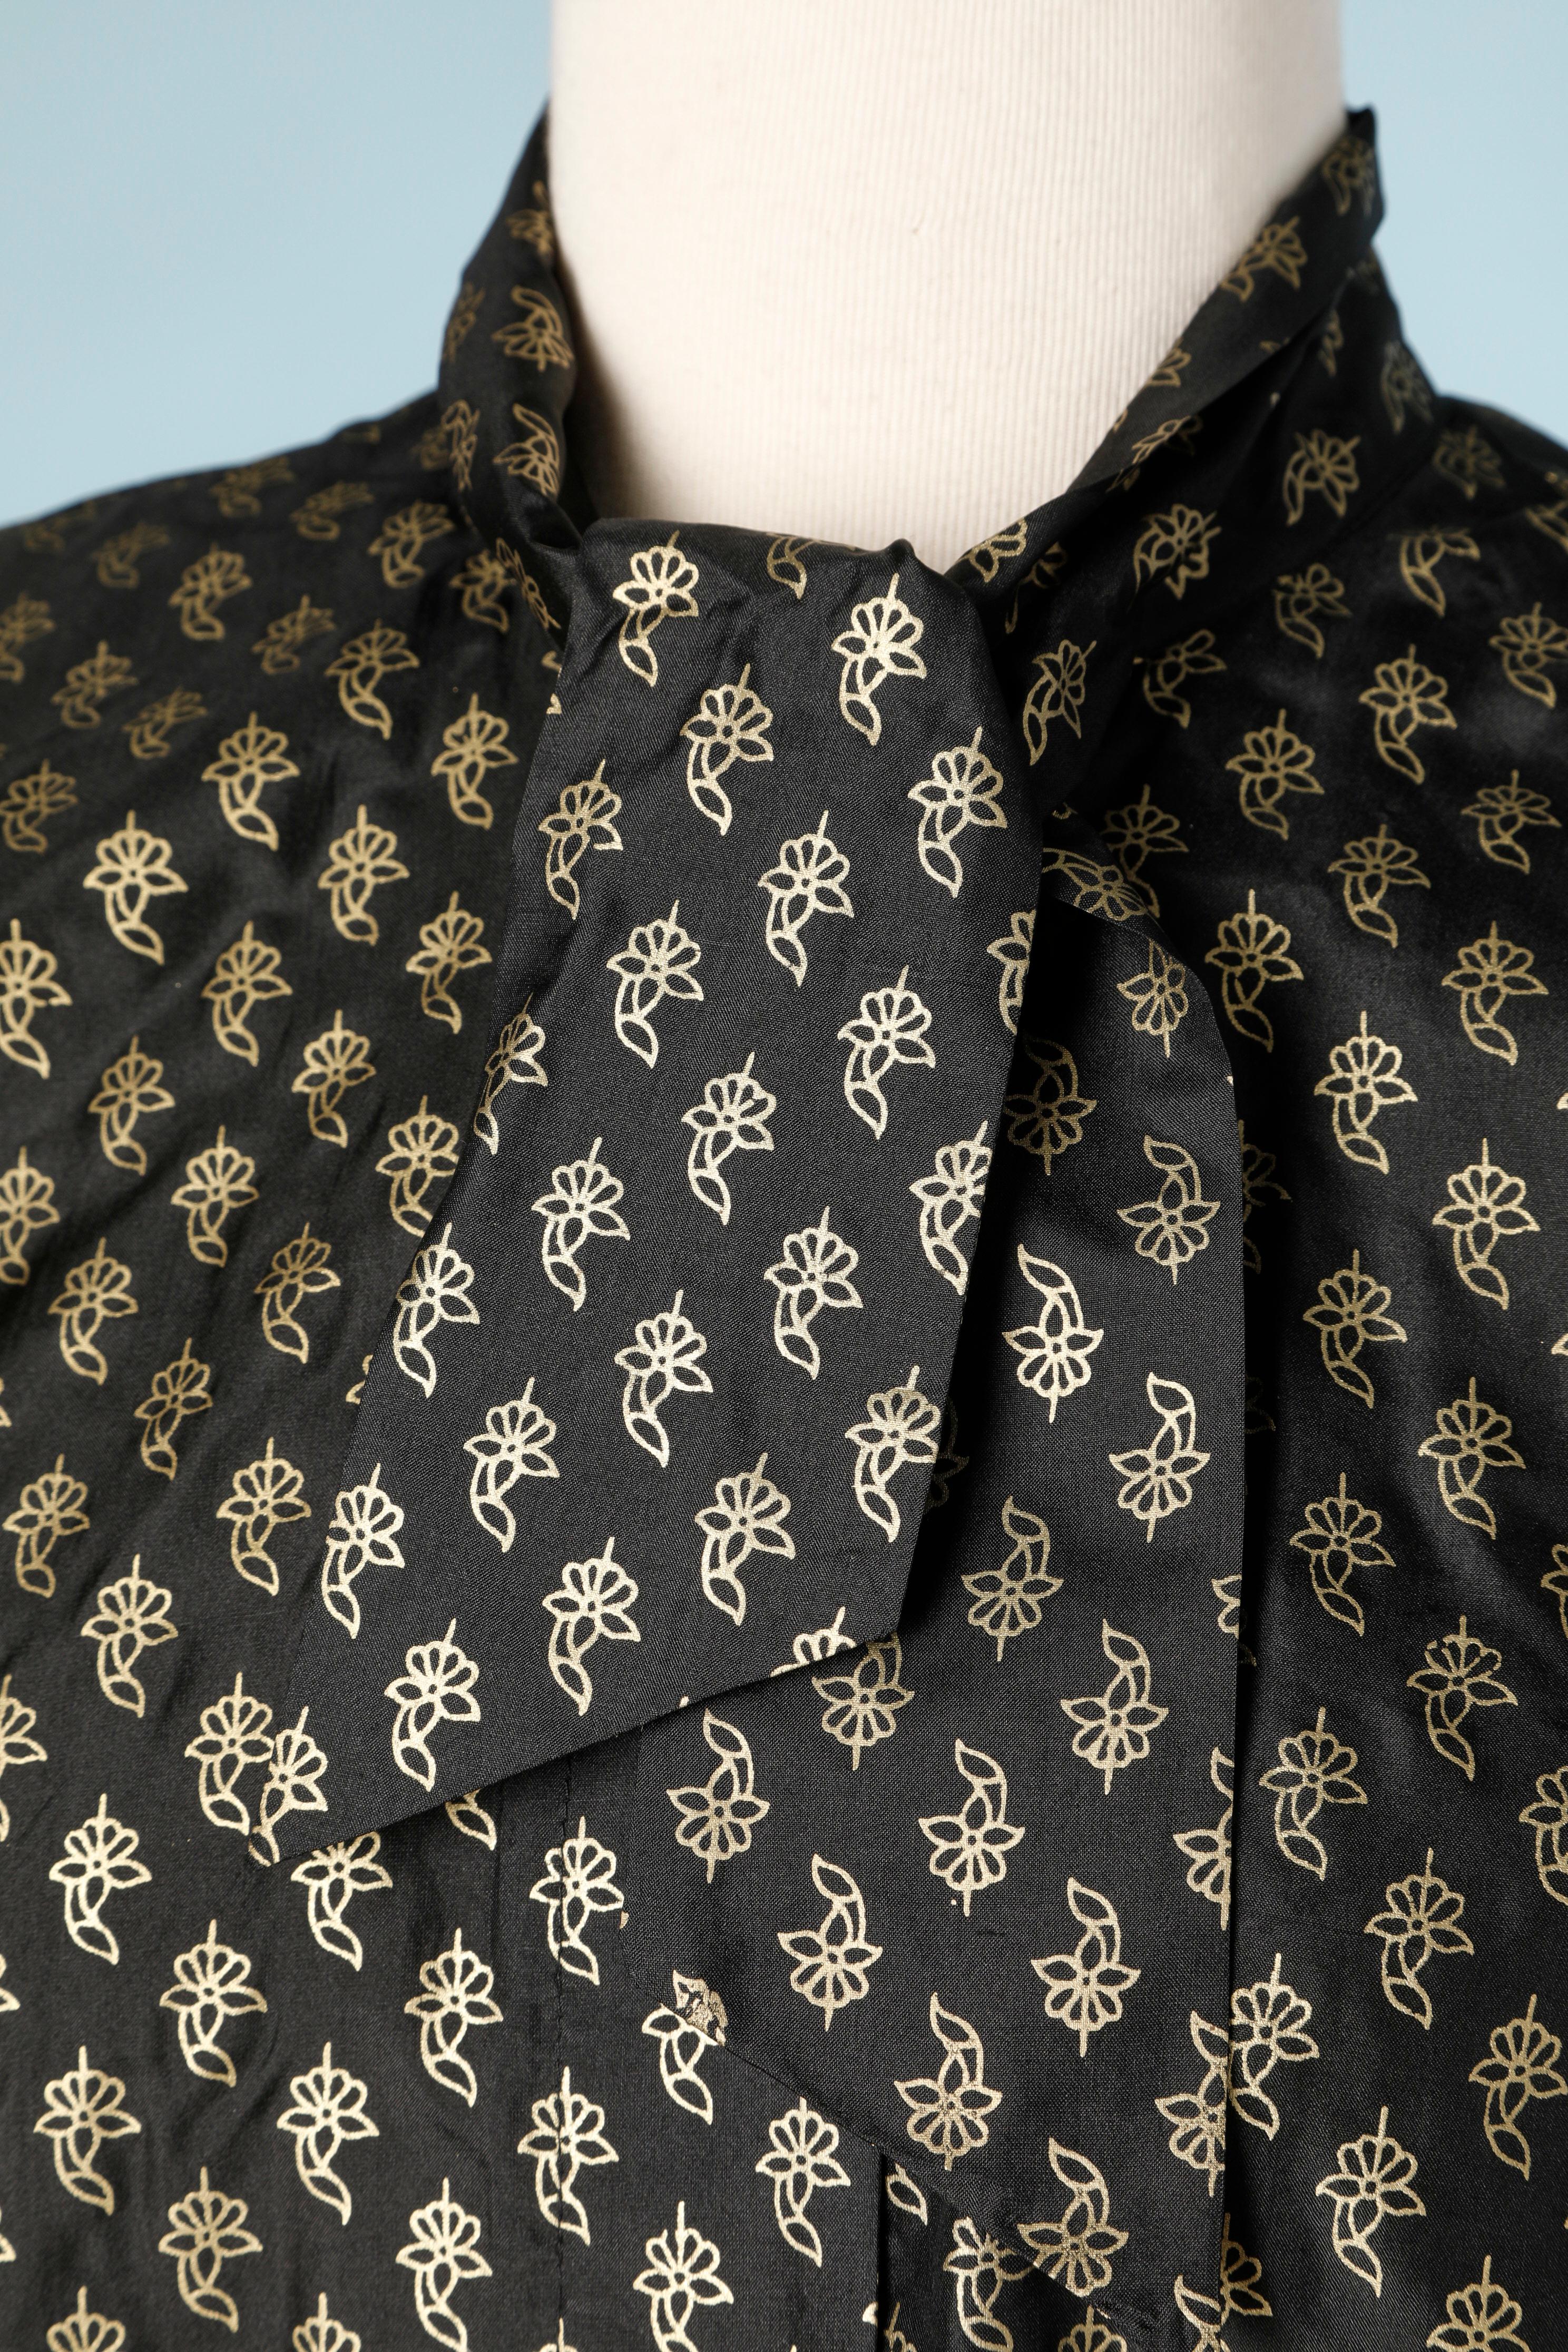 Black shirt with gold print pattern and bow tie. Gold button in the middle front and cuffs. FW 1991.
No fabric description but could be silk
SIZE 38 (Fr) M 